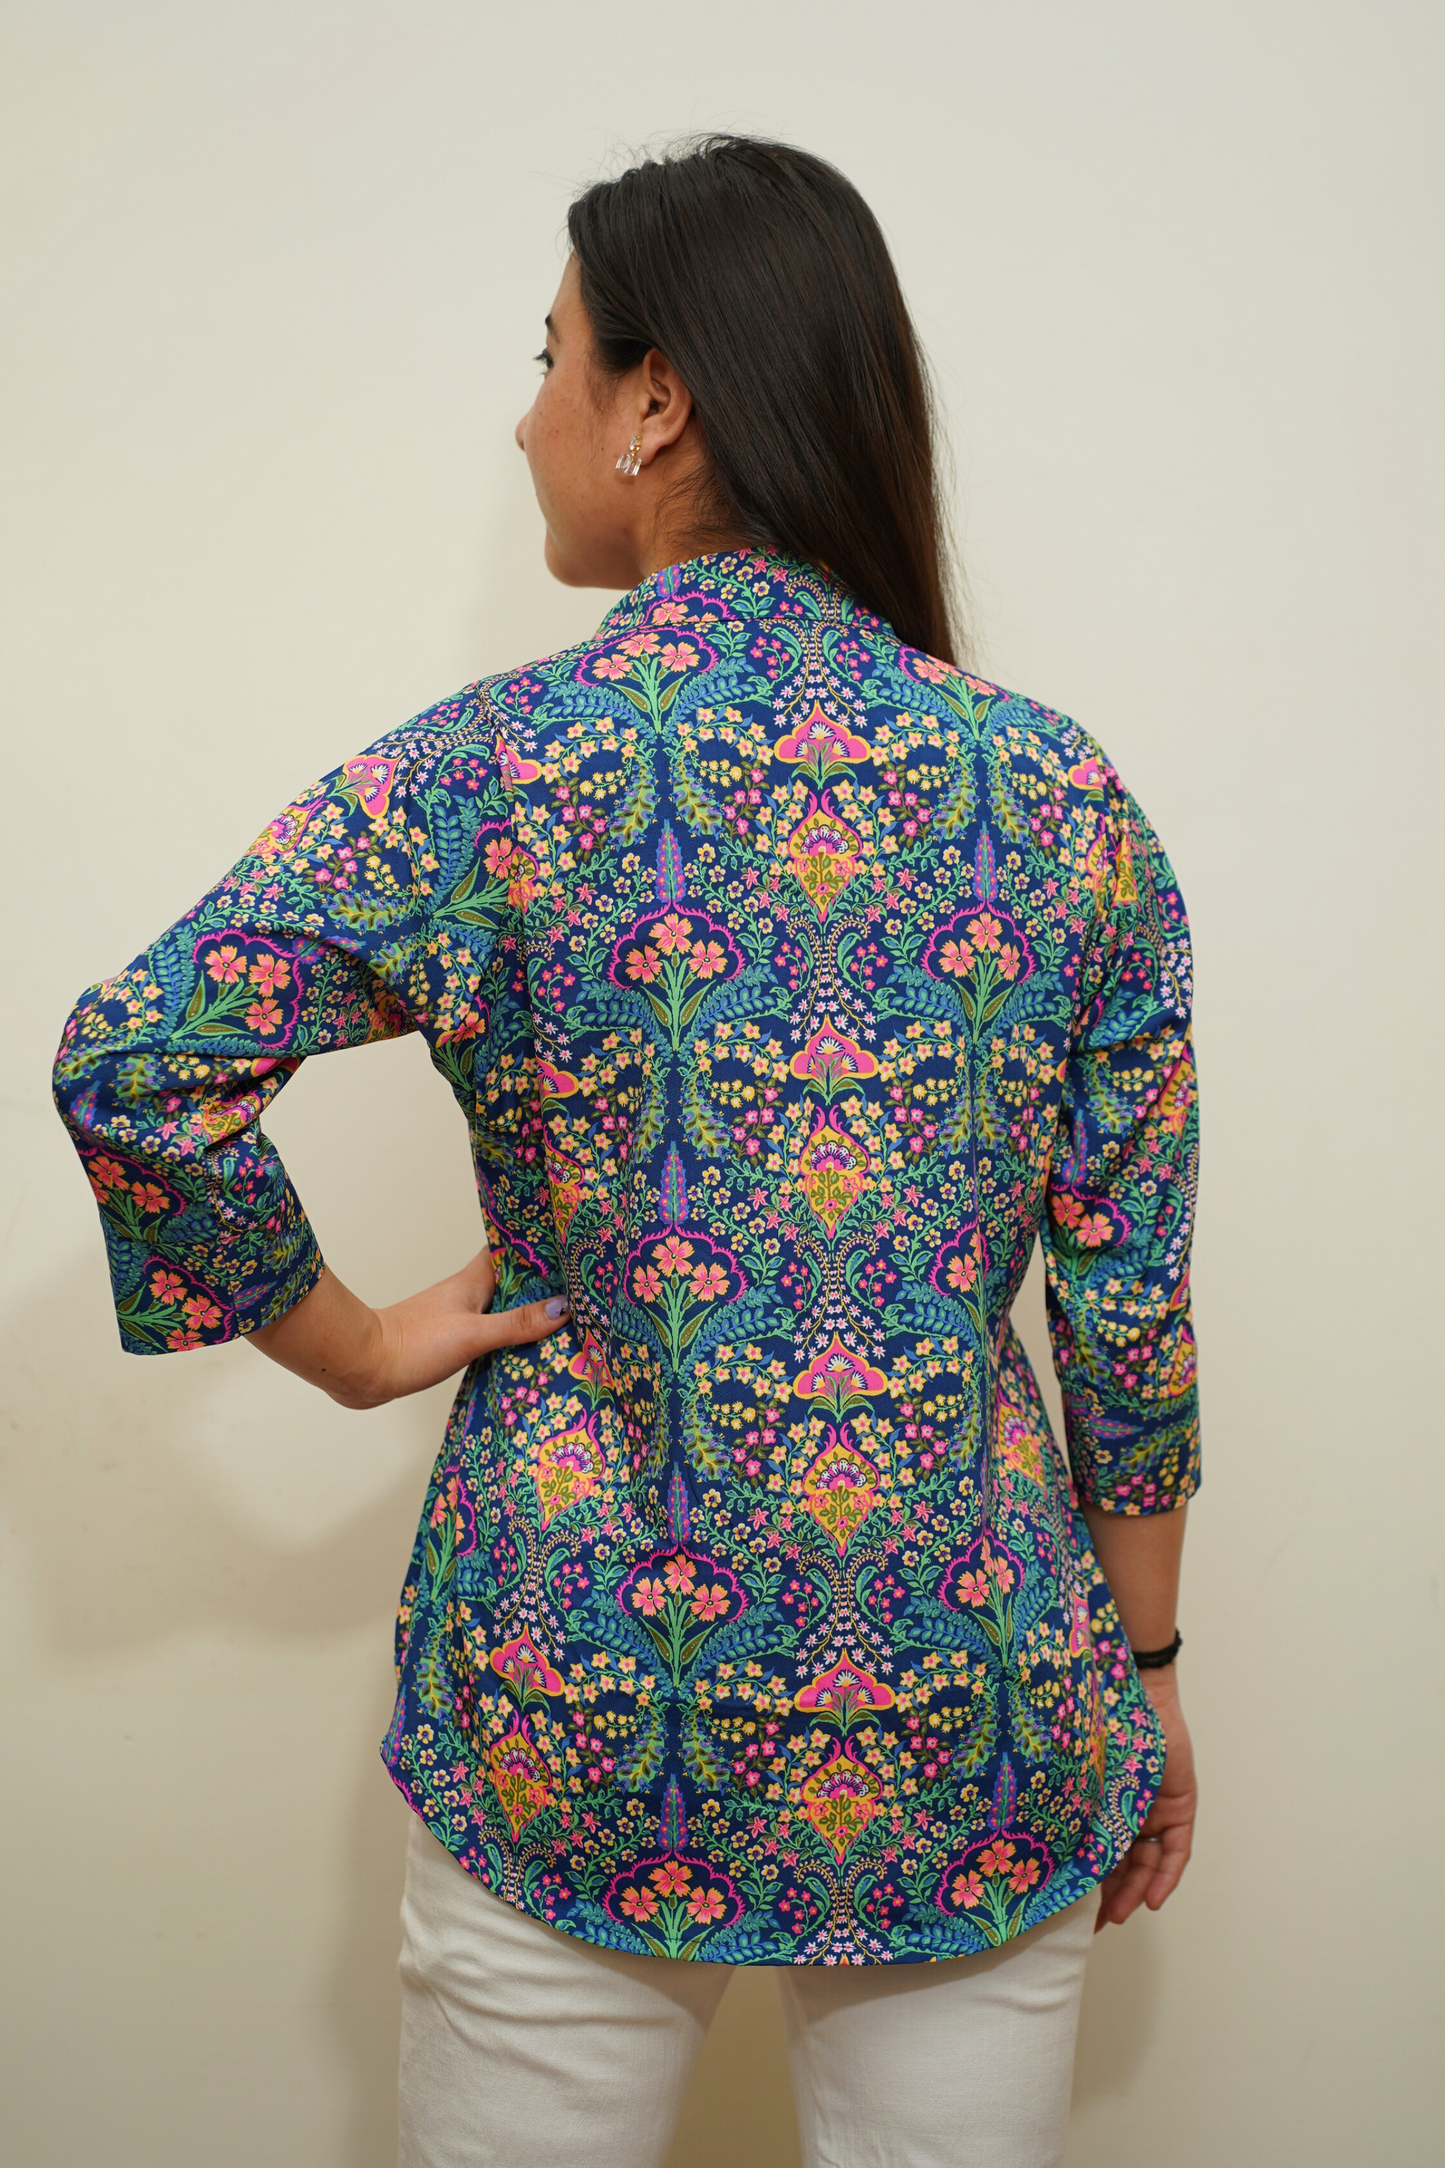 Printed Shirts For Women